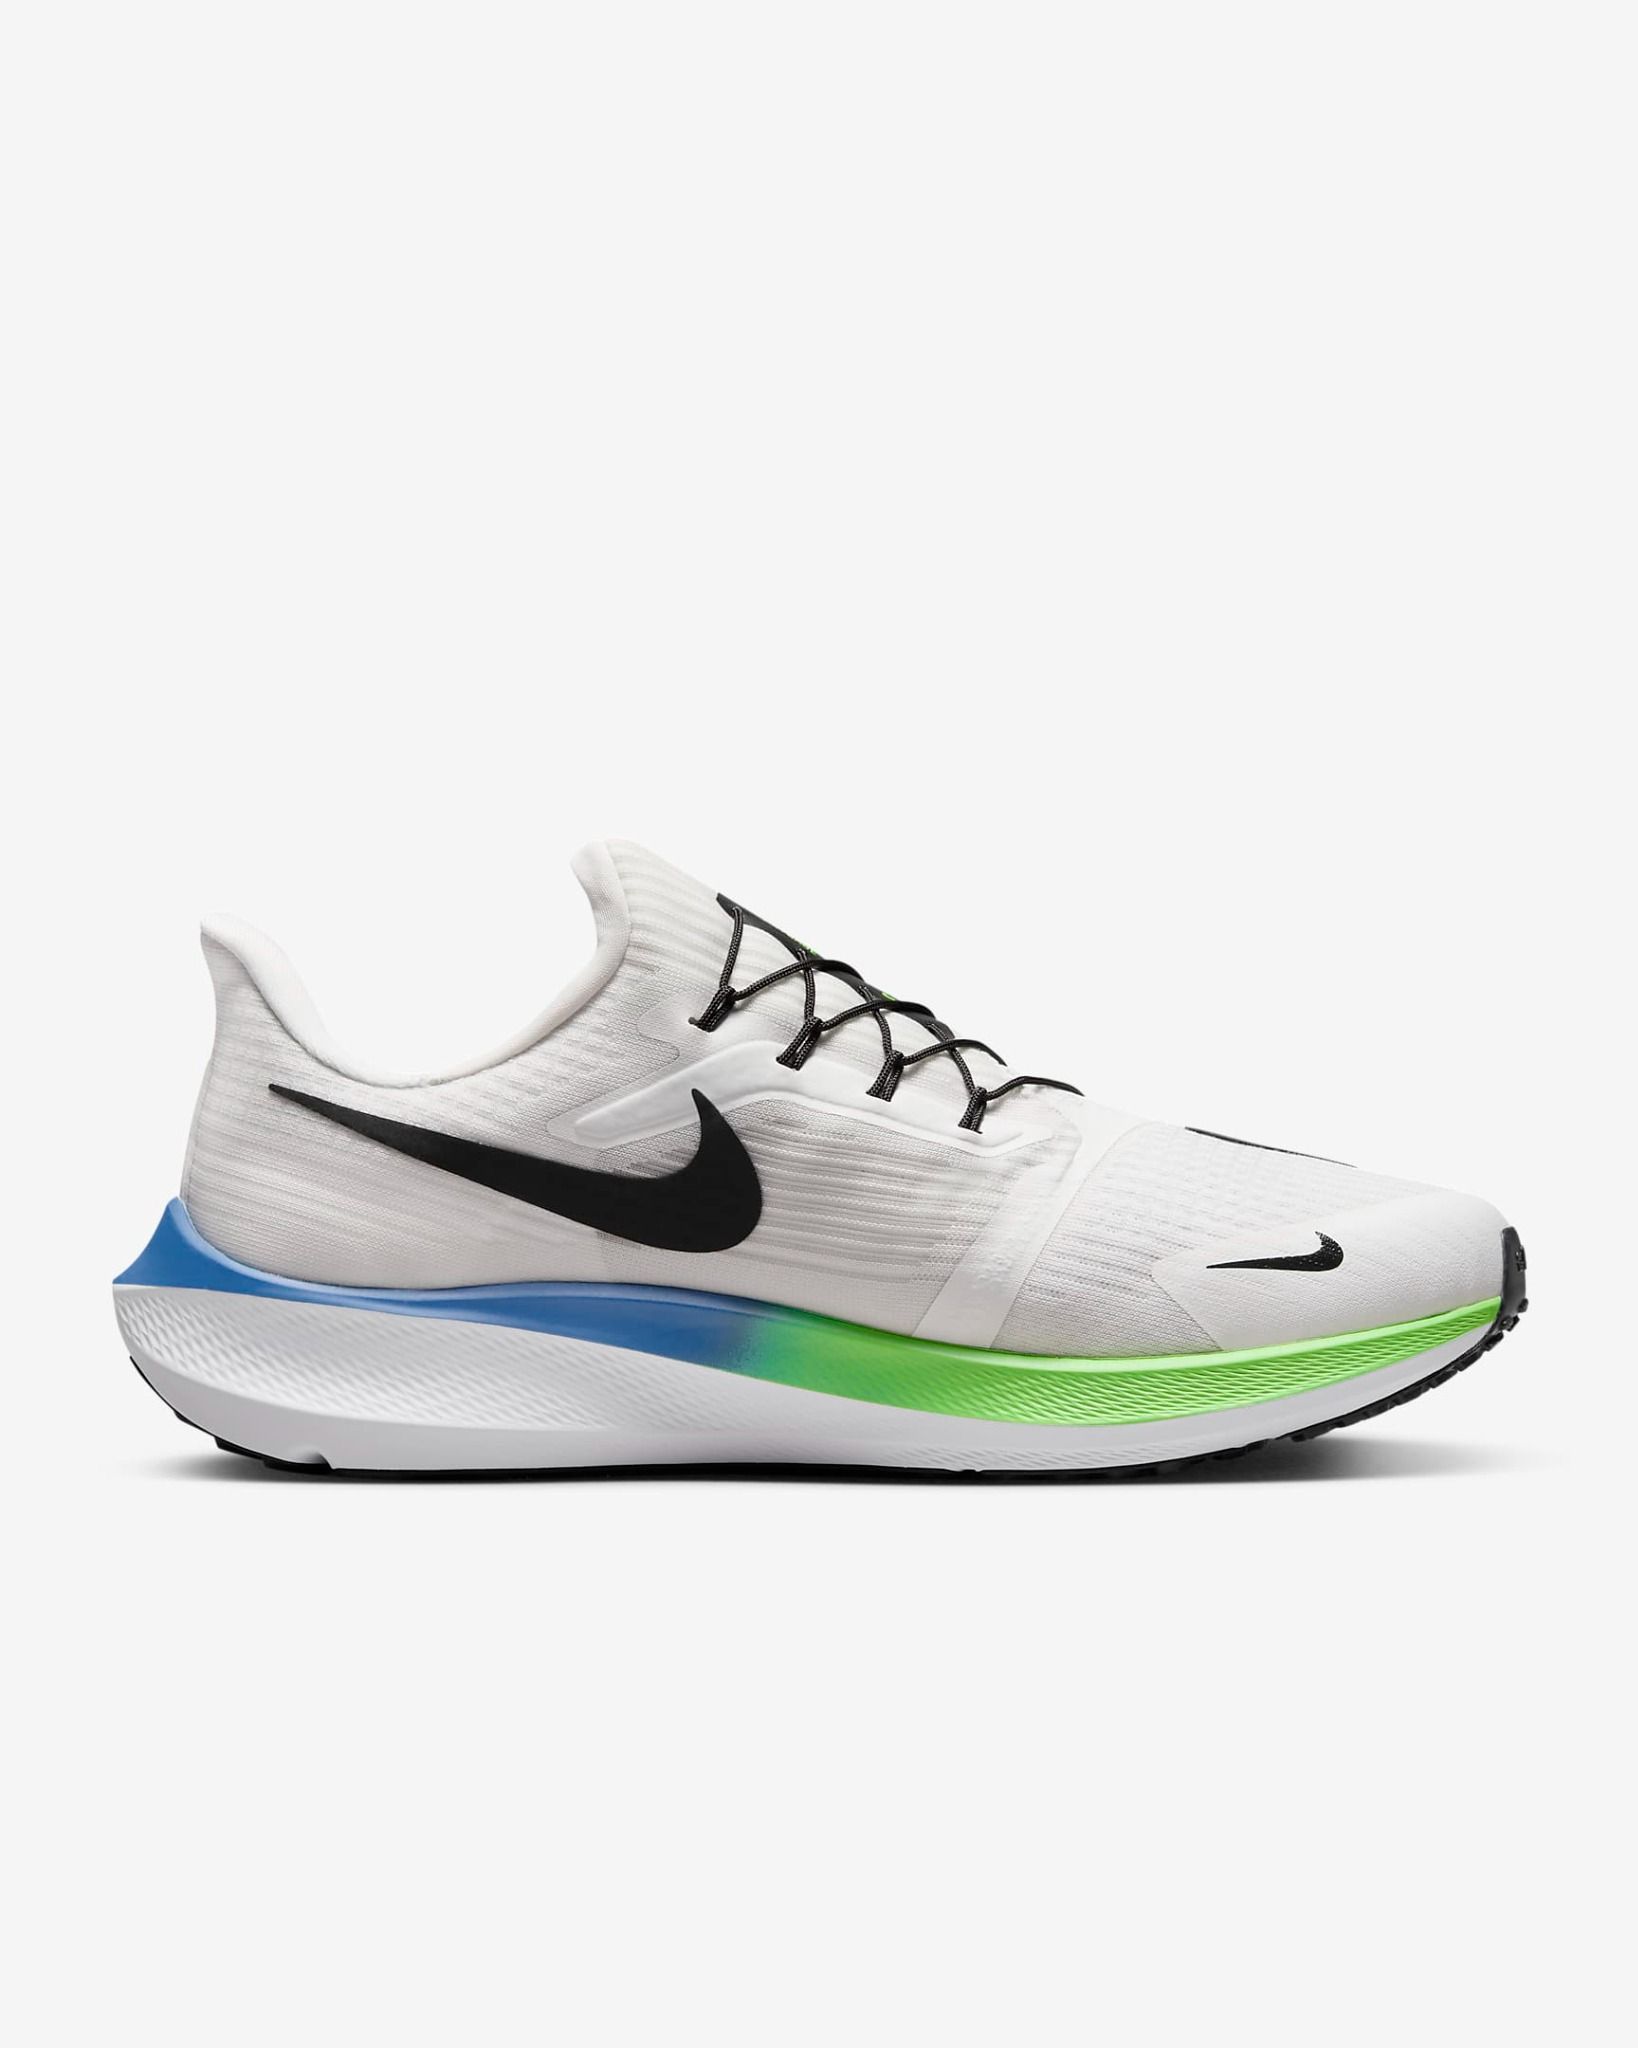 Nike - Giày chạy bộ thể thao Nam Pegasus FlyEase Men's Easy On/Off Road Running Shoes